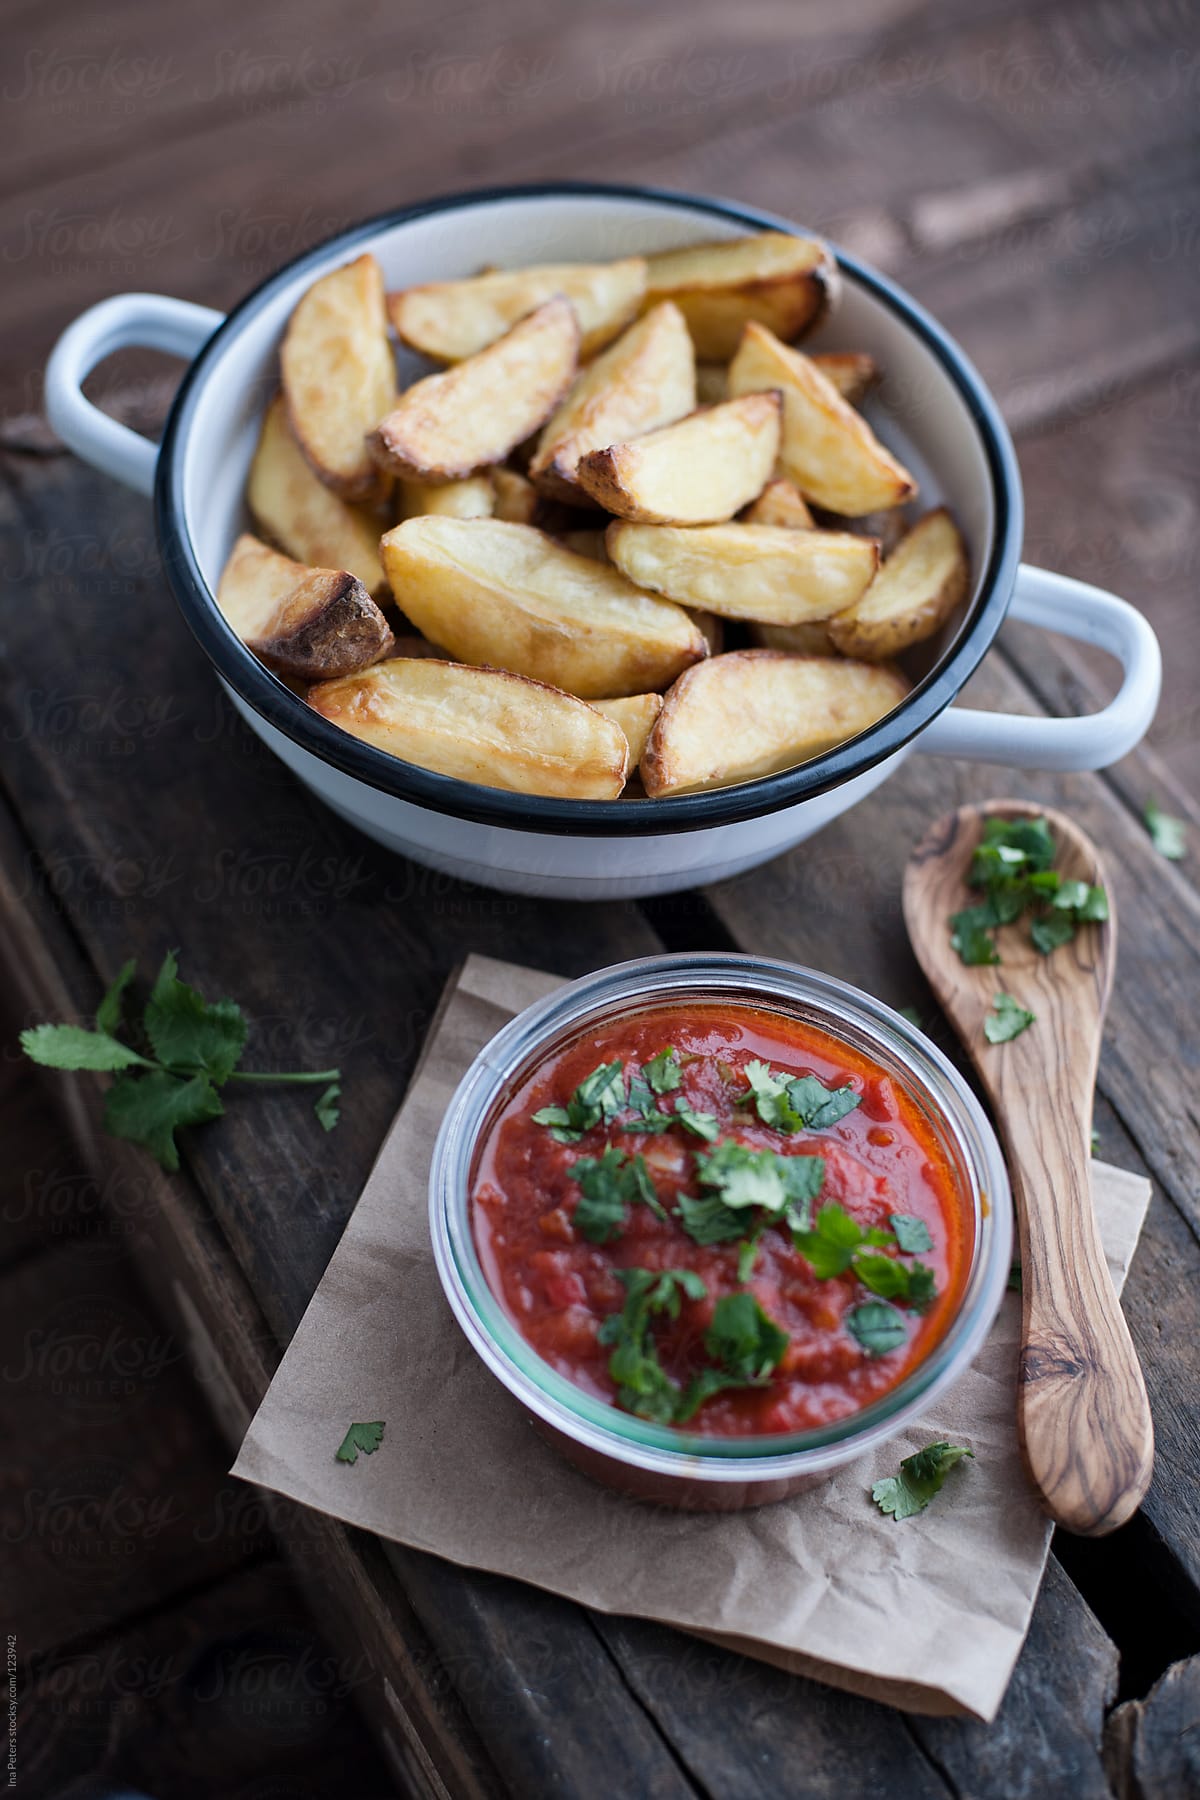 Food: Patatas Bravas, baked potatoes with a spicy tomato sauce g